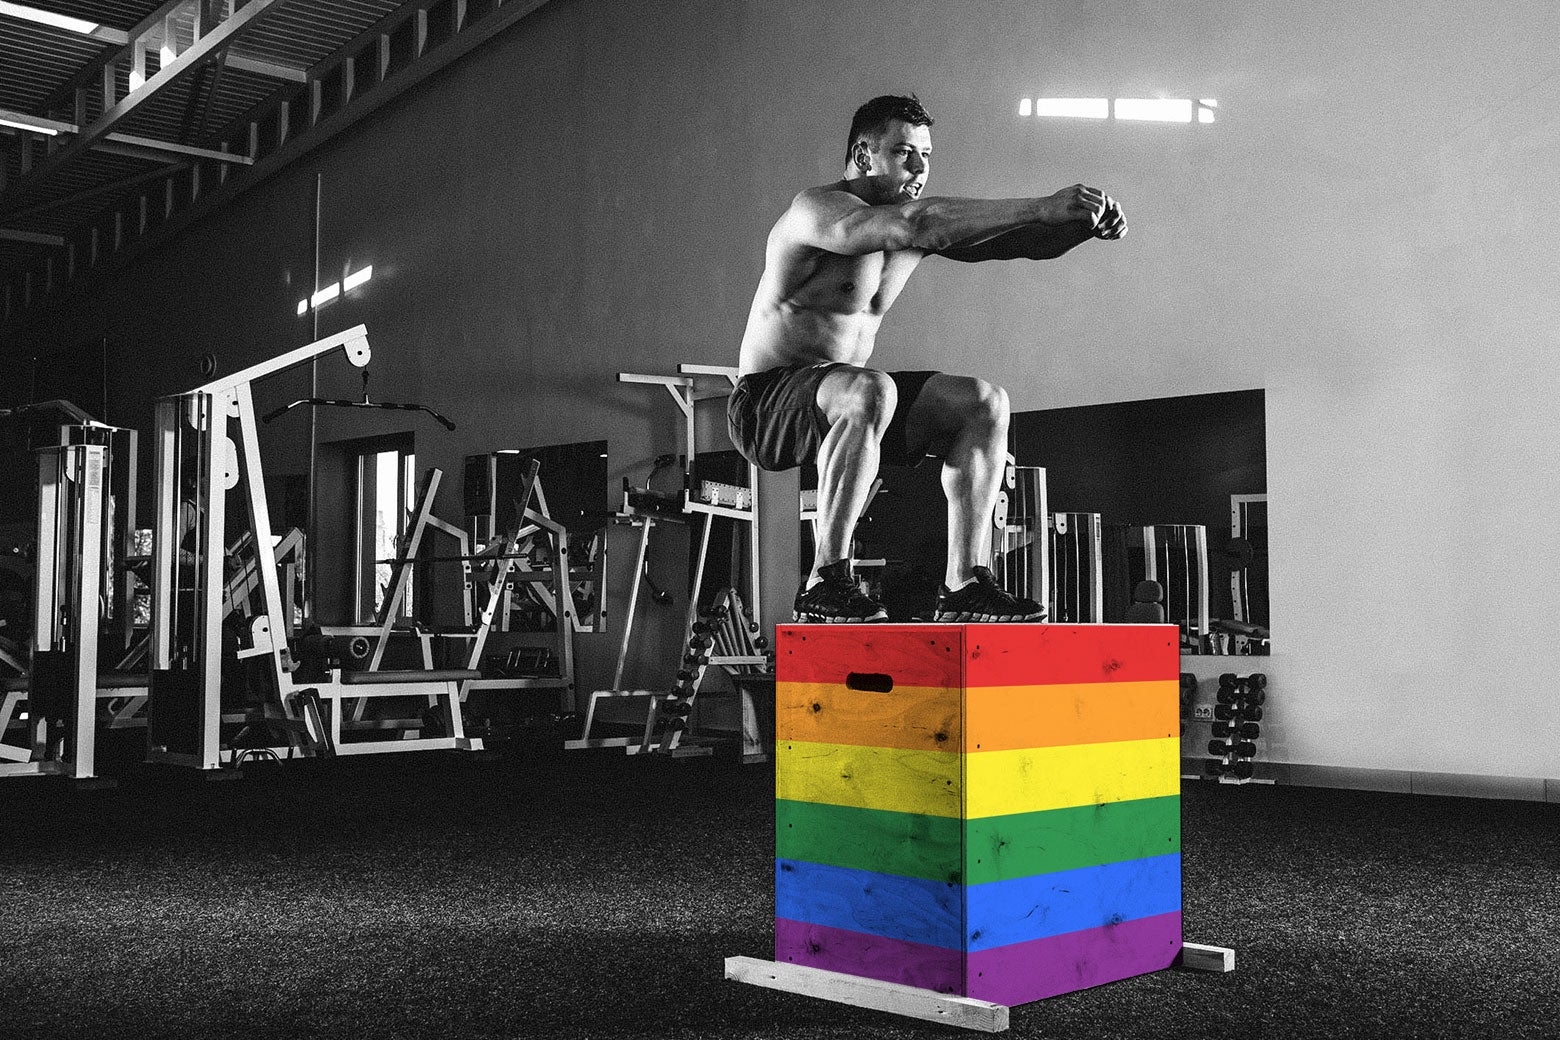 Photo illustration: A man does a box jump at the gym. The boxes have been edited to reflect a rainbow flag.